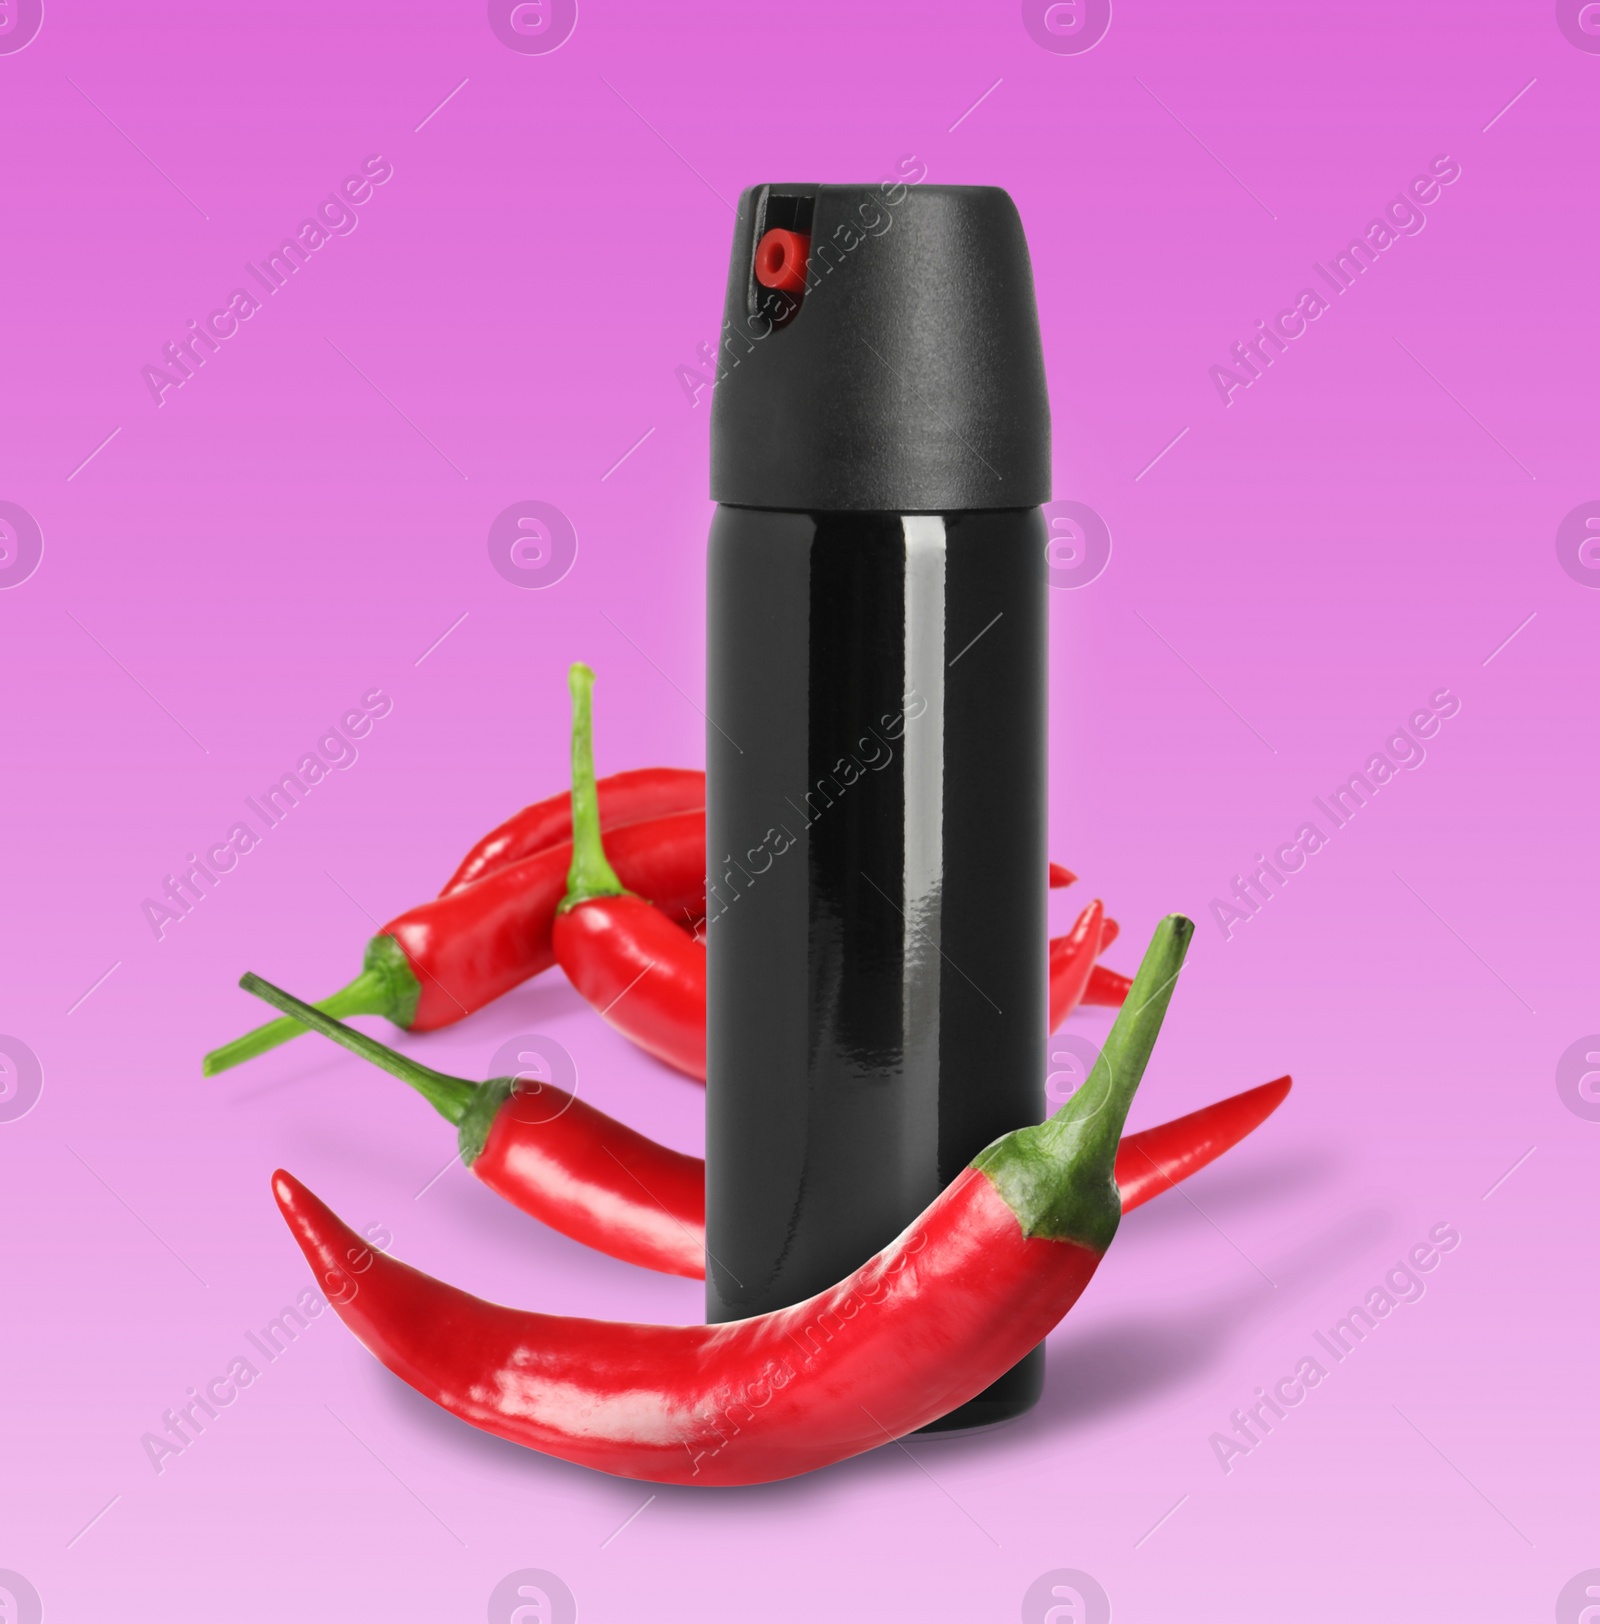 Image of Bottle of pepper spray and red hot chilies on pink background